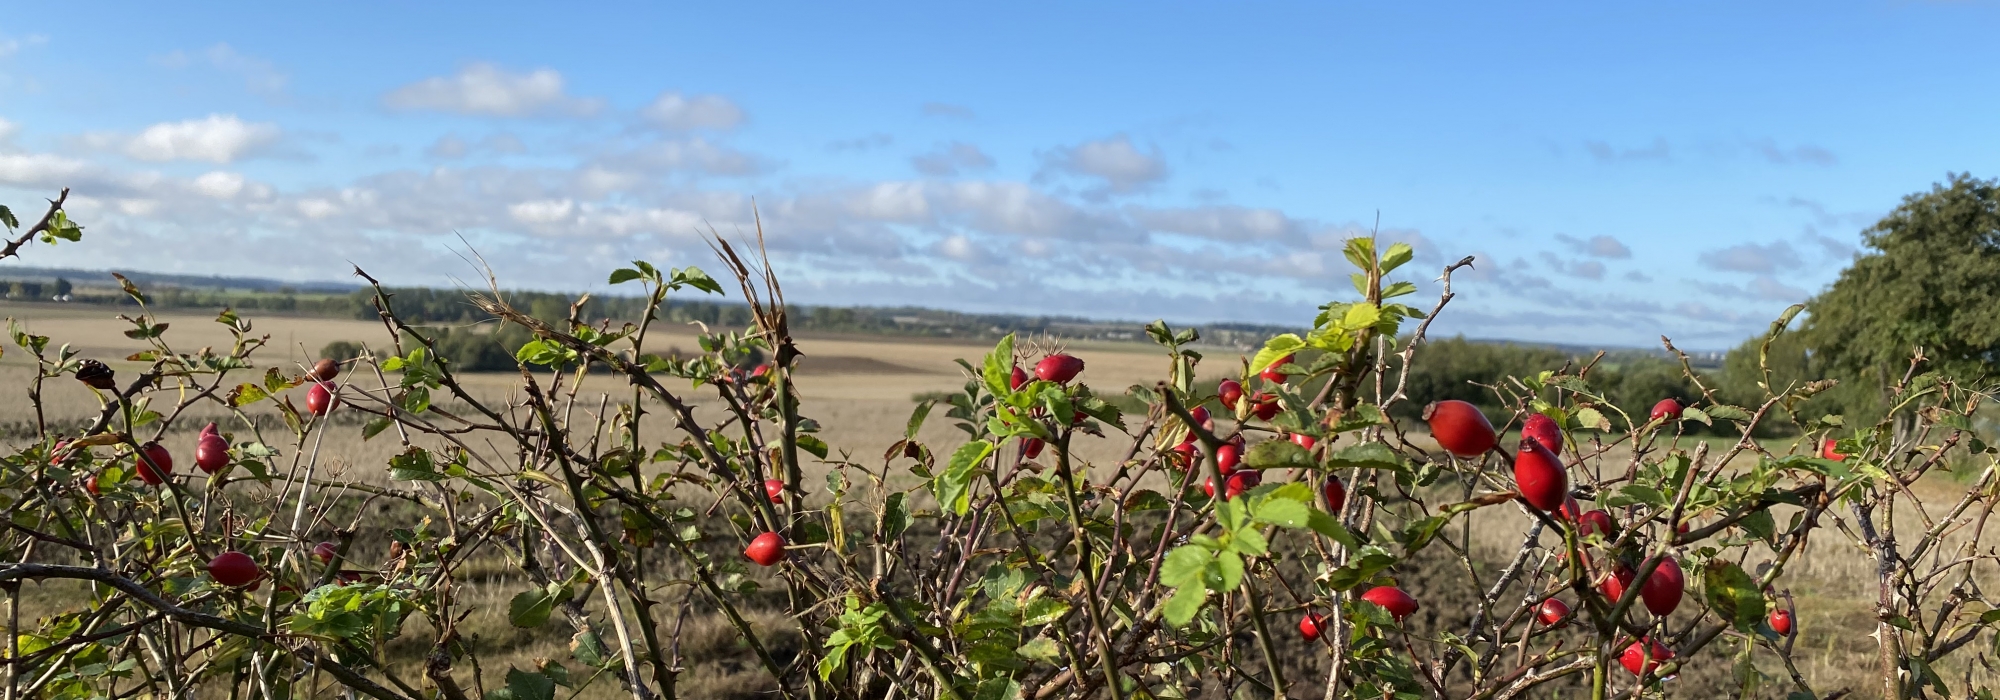 Rose hips in filed with blue sky